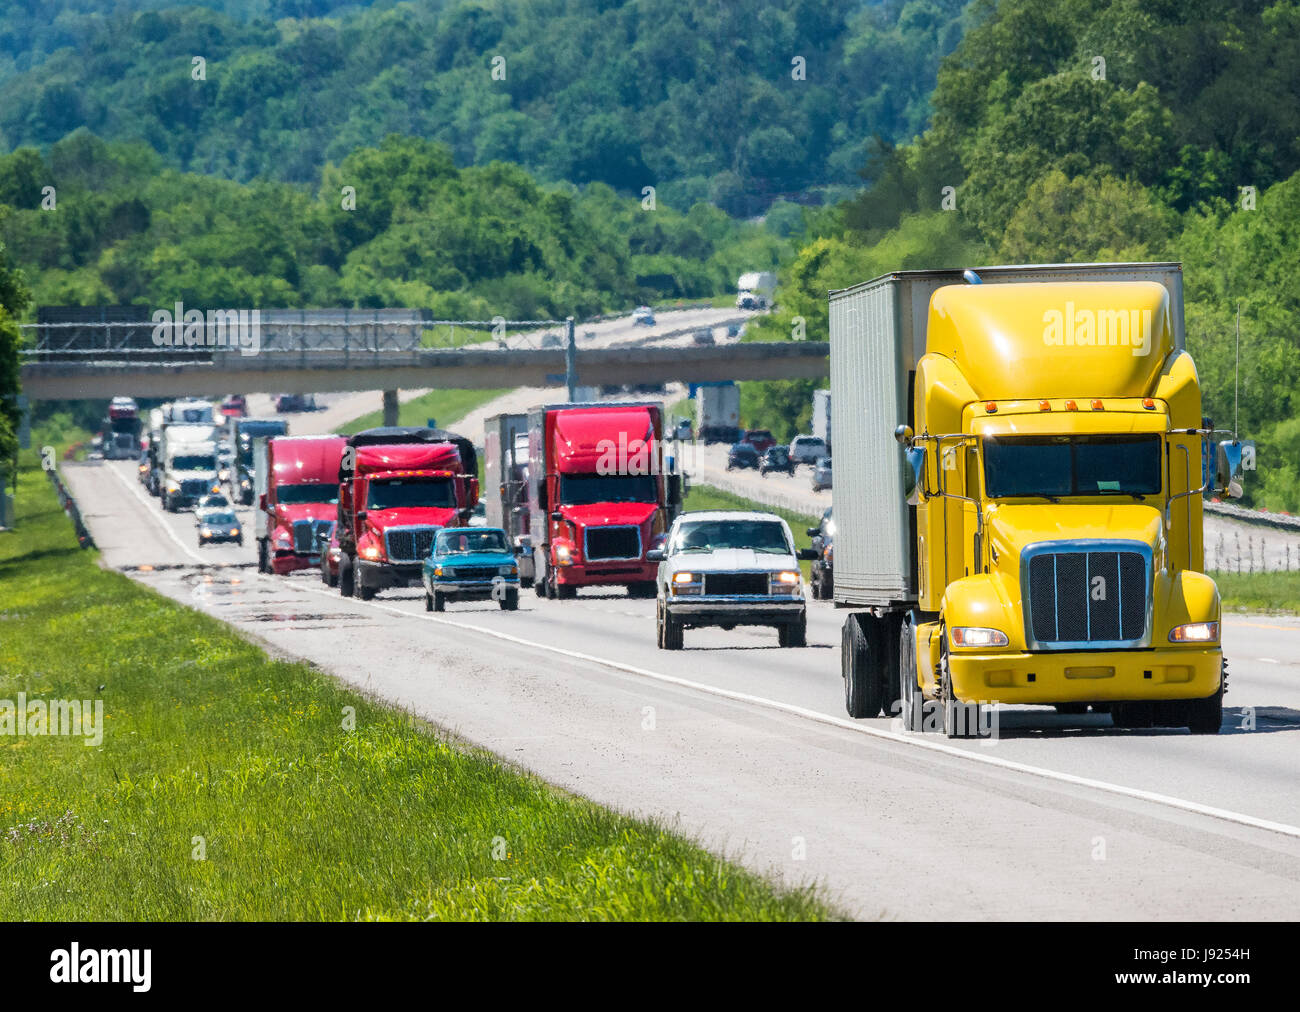 A yellow semi leads a packed line of traffic down an interstate in Tennessee.  Heat rising from the pavement gives a shimmering effect to vehicles and Stock Photo